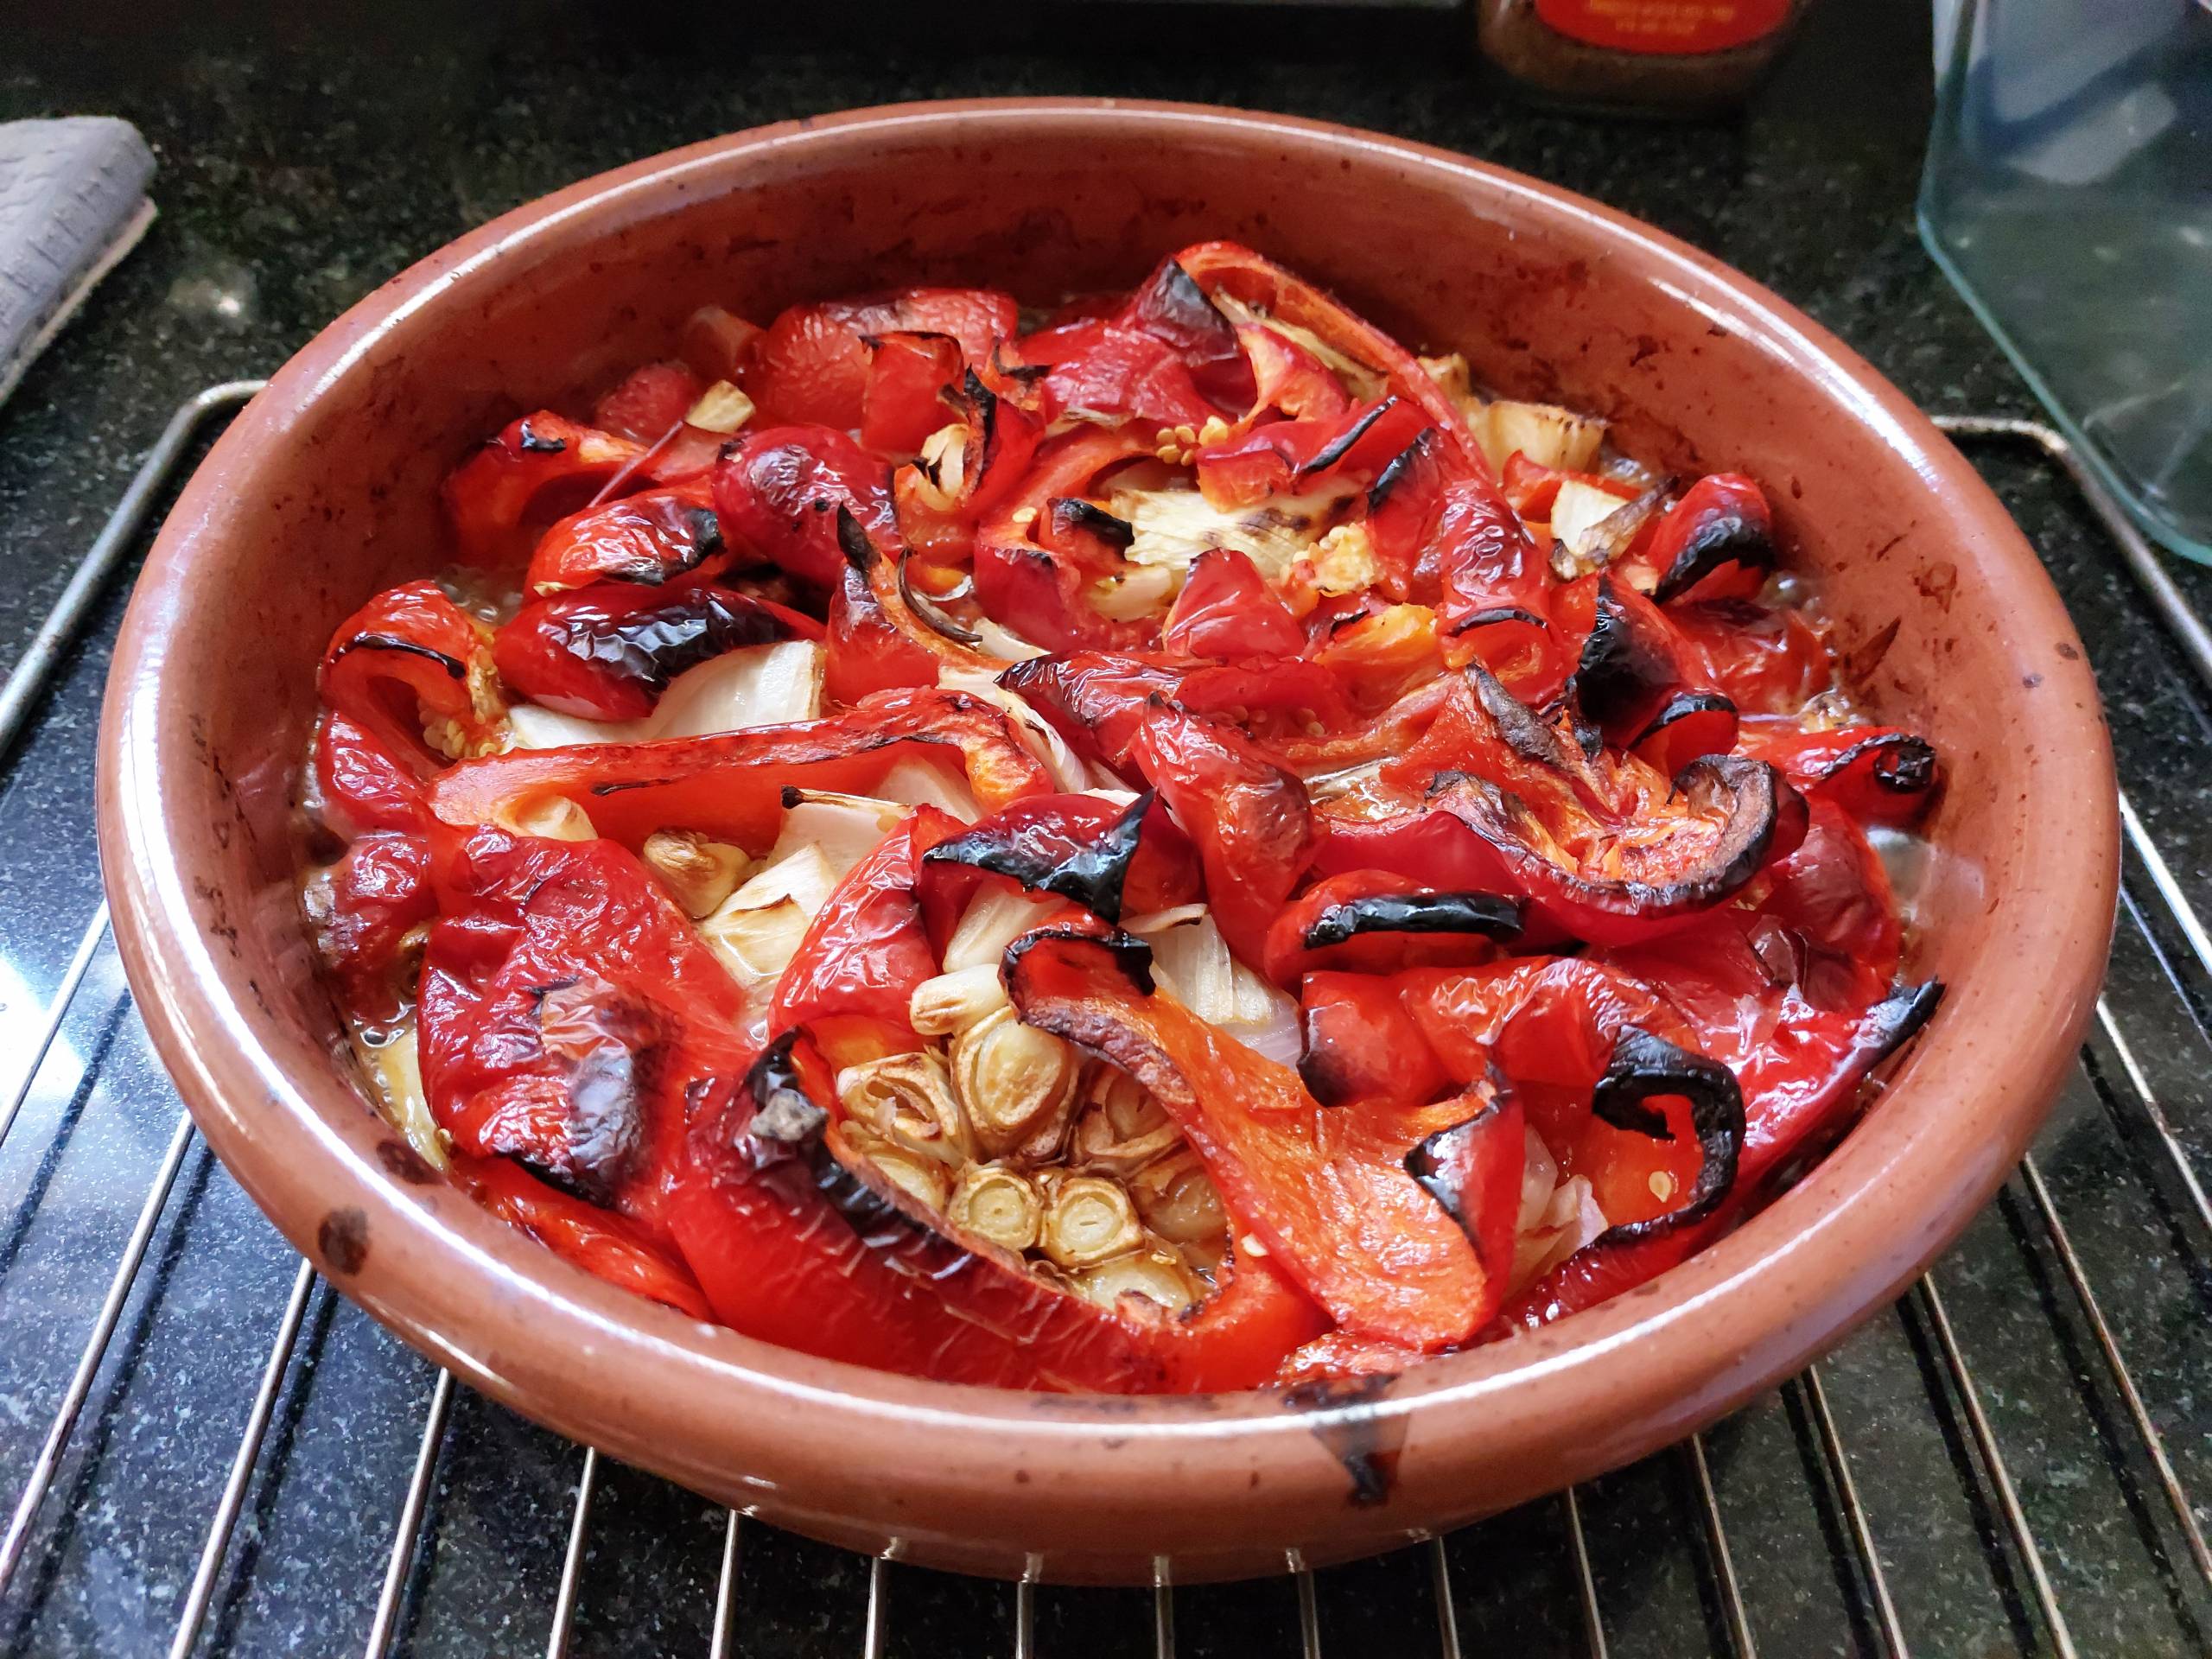 How to Make Red Pepper Escabeche: A Simple and Delicious Spanish Dish